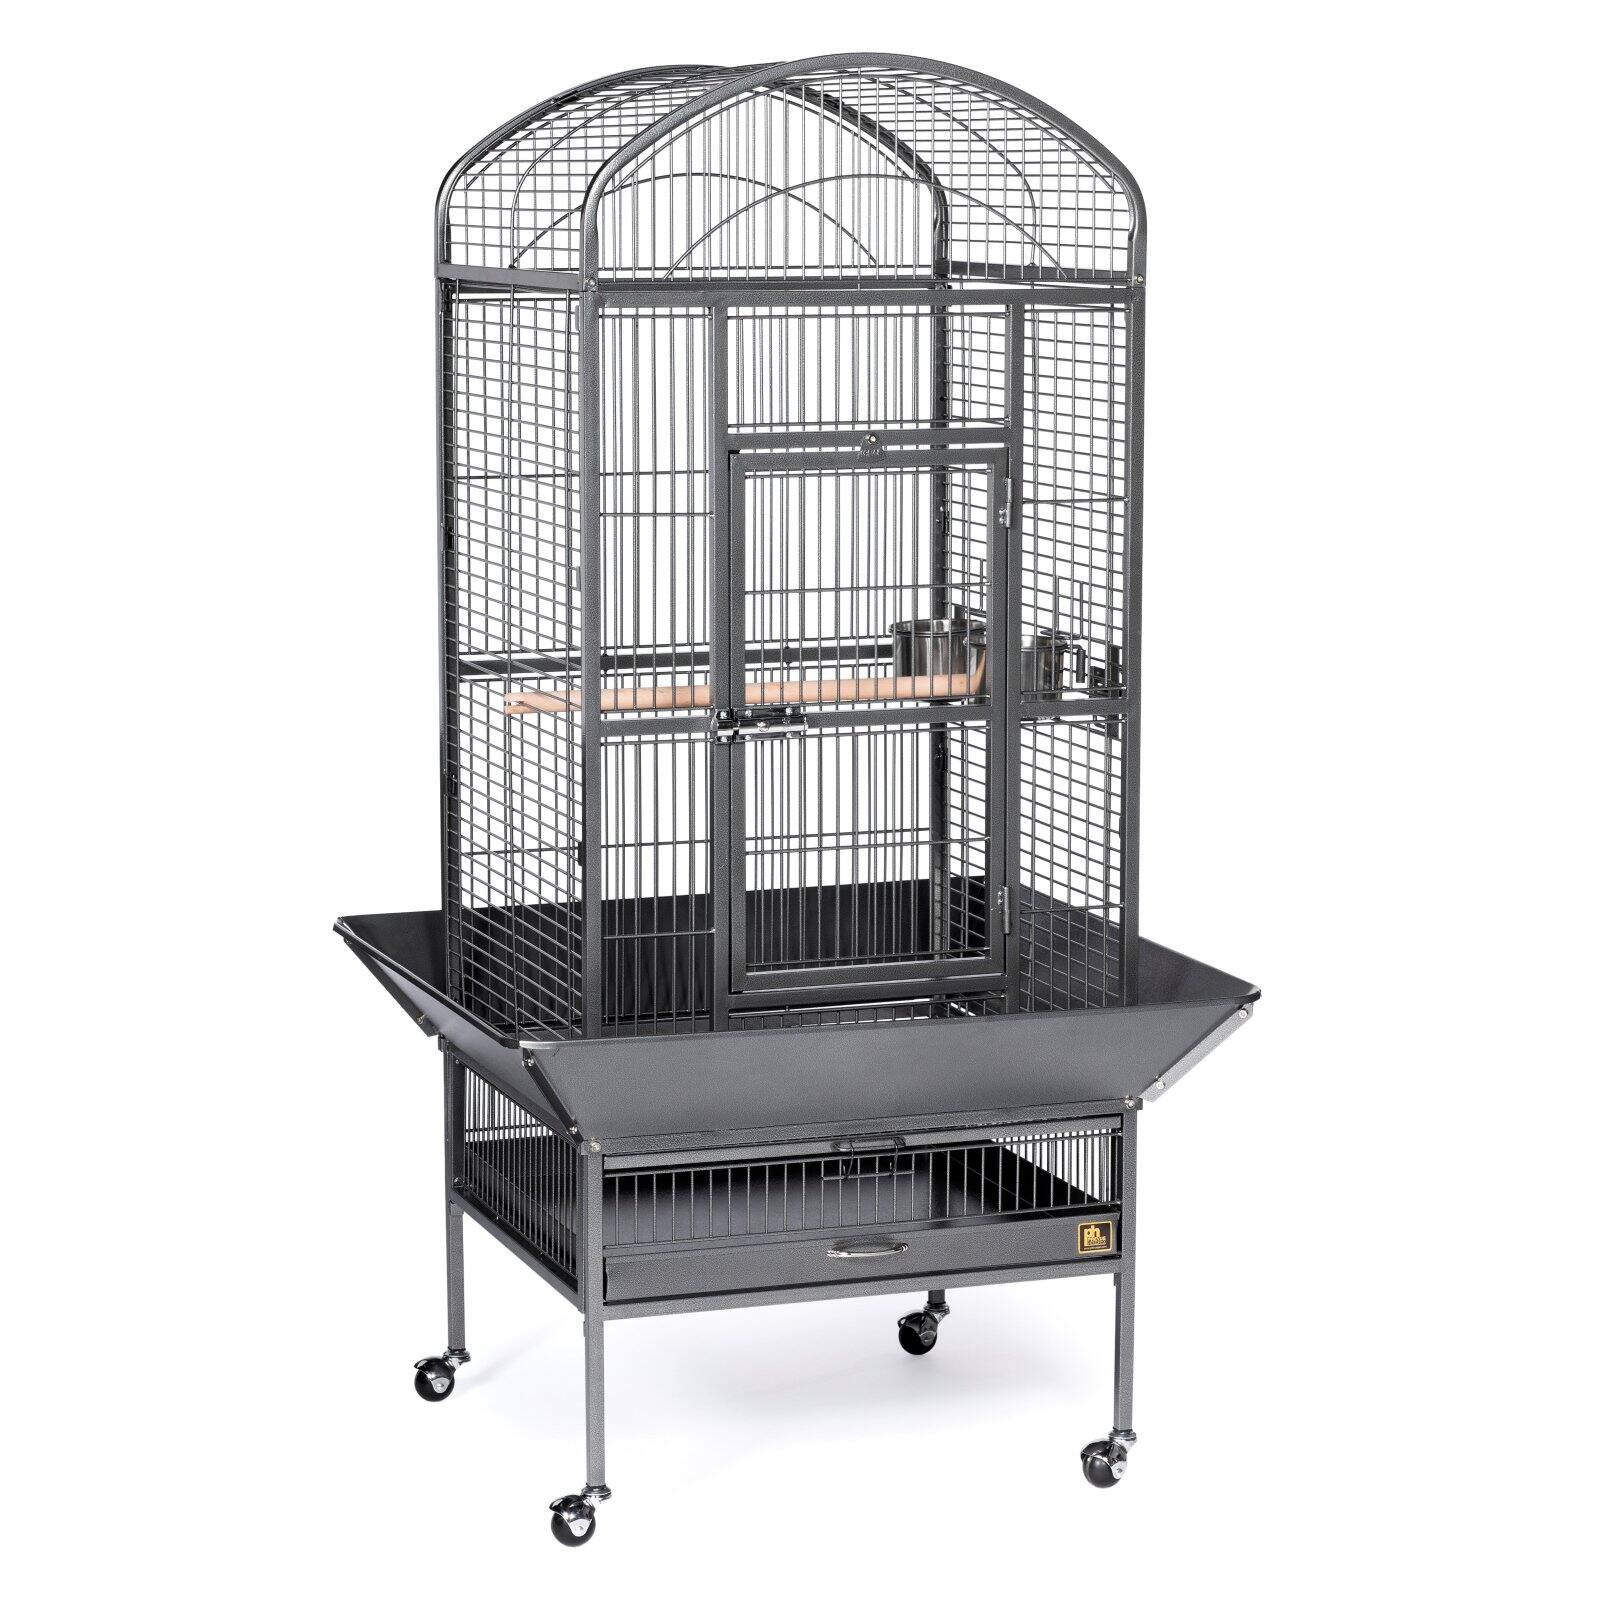 Prevue Pet Products Small Dometop Bird Cage Black Hammertone 34511 - image 3 of 11